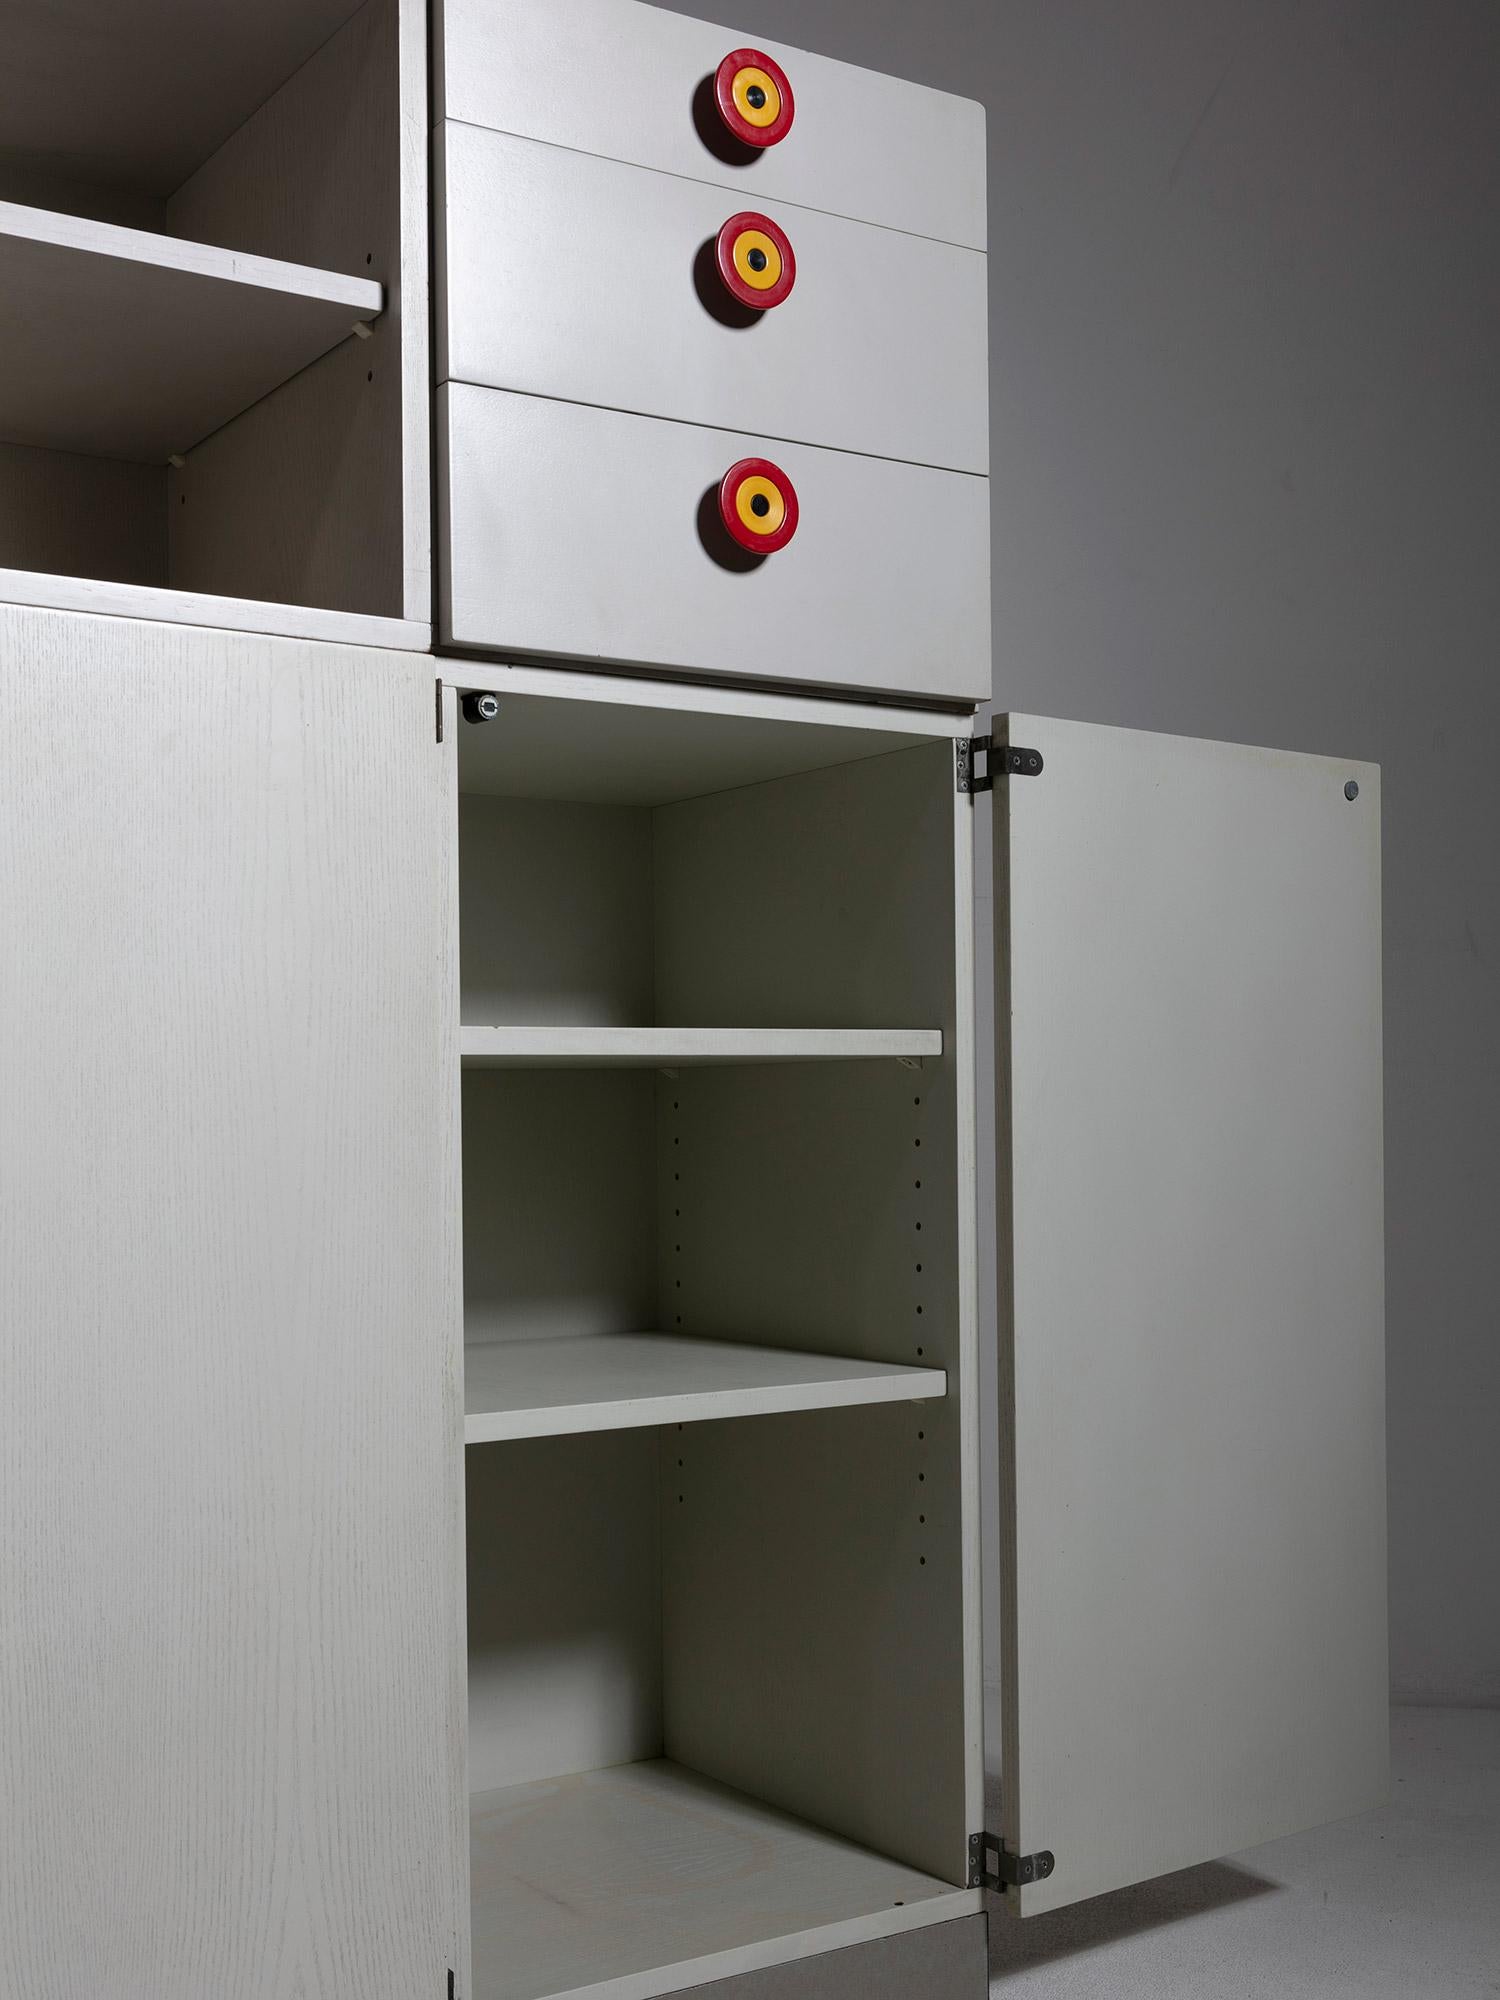 Mid-20th Century Radical Design Kubirolo Cabinets by Ettore Sottsass for Poltronova, Italy, 1960s For Sale